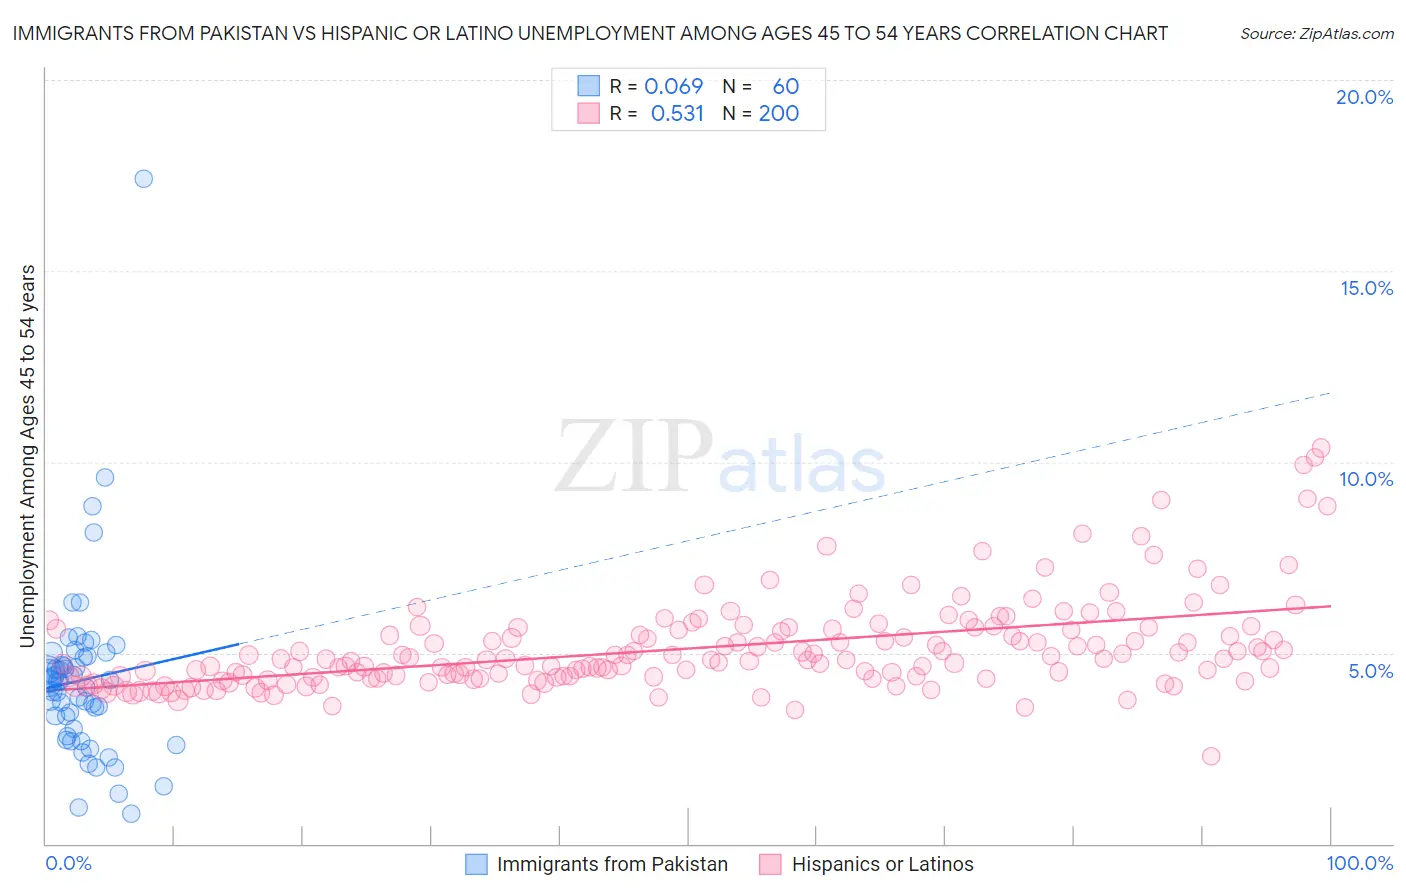 Immigrants from Pakistan vs Hispanic or Latino Unemployment Among Ages 45 to 54 years